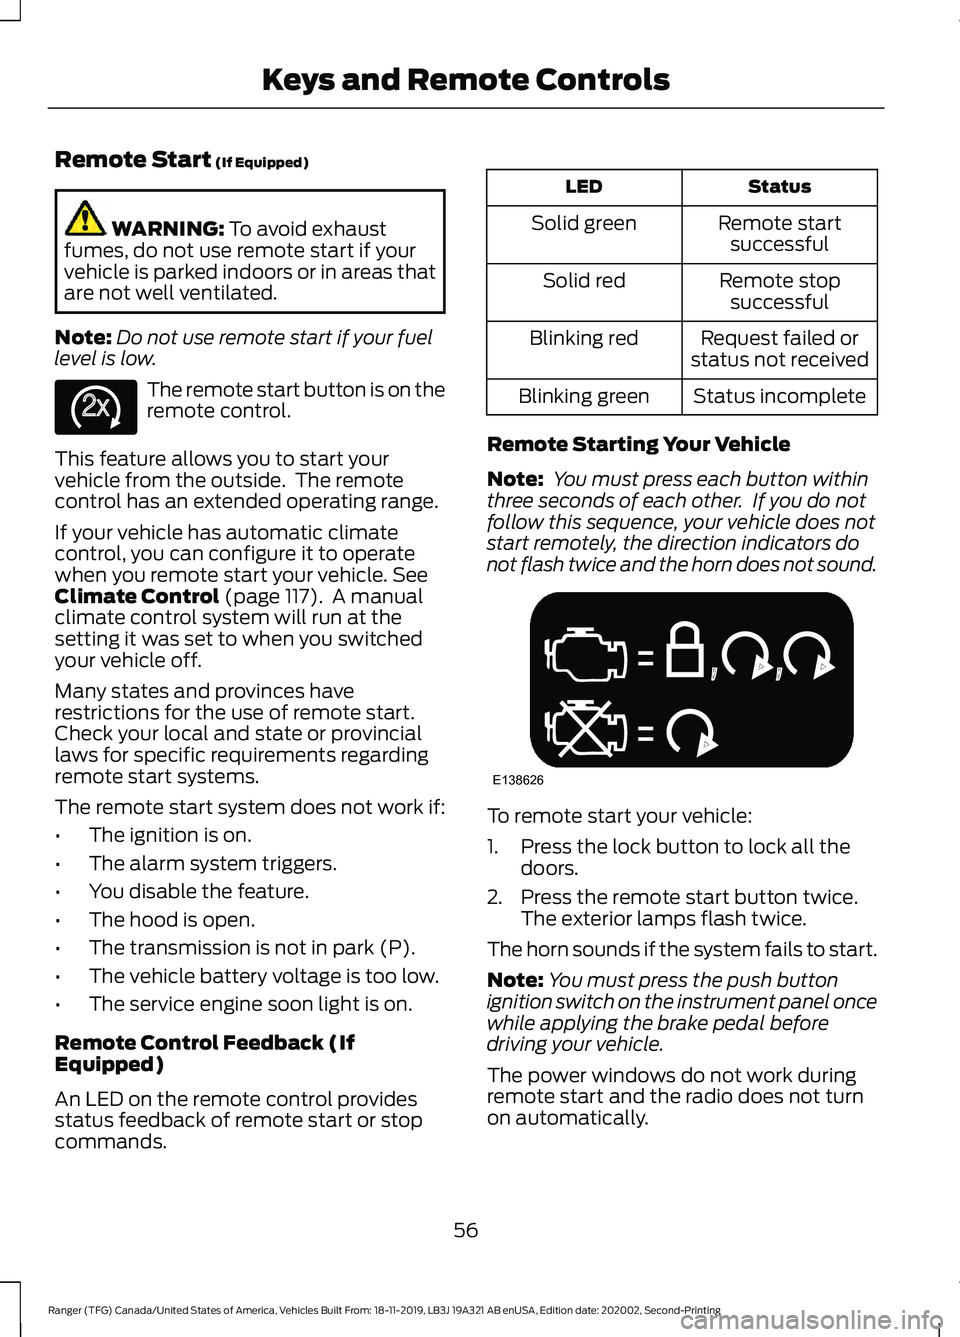 FORD RANGER 2020  Owners Manual Remote Start (If Equipped)
WARNING: 
To avoid exhaust
fumes, do not use remote start if your
vehicle is parked indoors or in areas that
are not well ventilated.
Note: Do not use remote start if your f